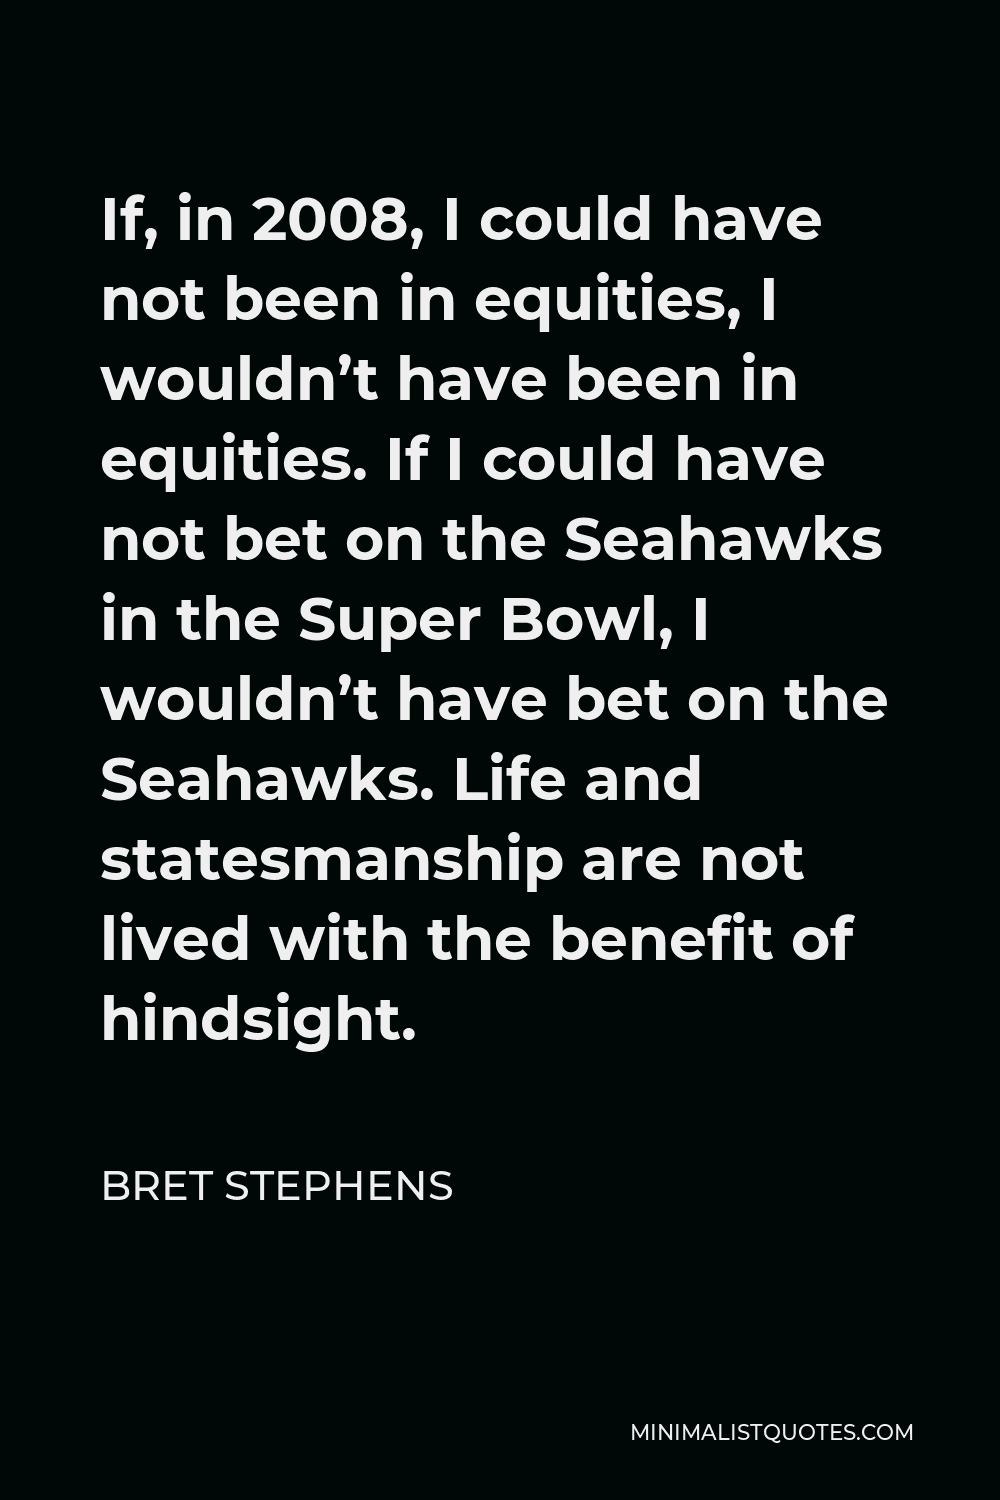 Bret Stephens Quote - If, in 2008, I could have not been in equities, I wouldn’t have been in equities. If I could have not bet on the Seahawks in the Super Bowl, I wouldn’t have bet on the Seahawks. Life and statesmanship are not lived with the benefit of hindsight.